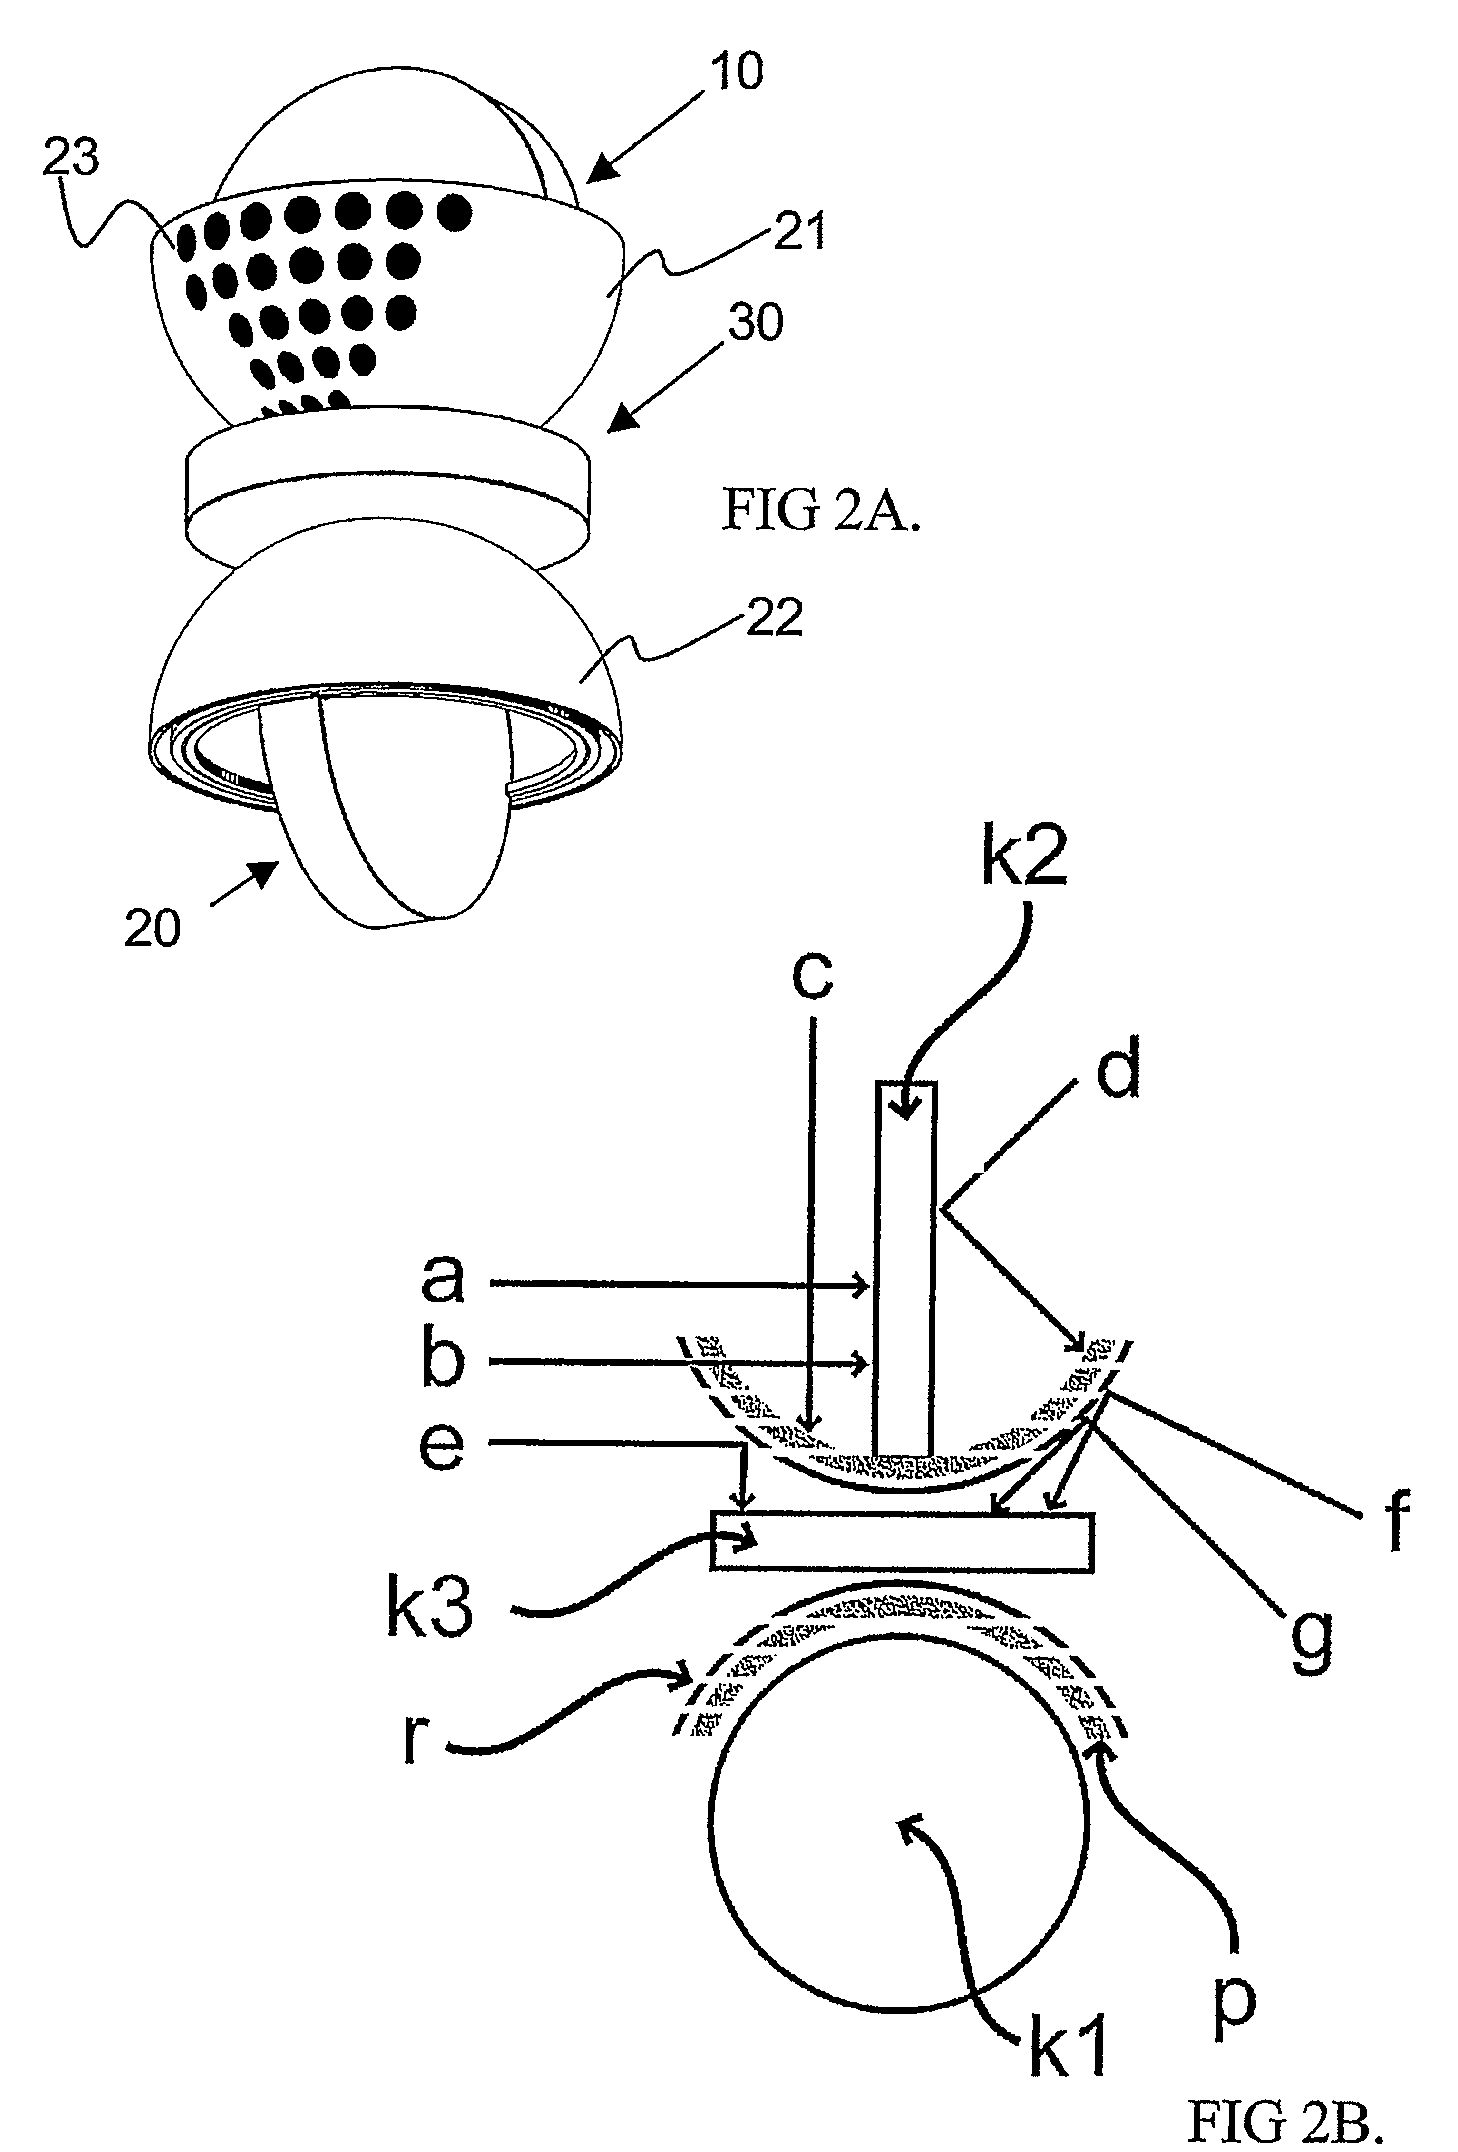 Assembly, system and method for acoustic transducers